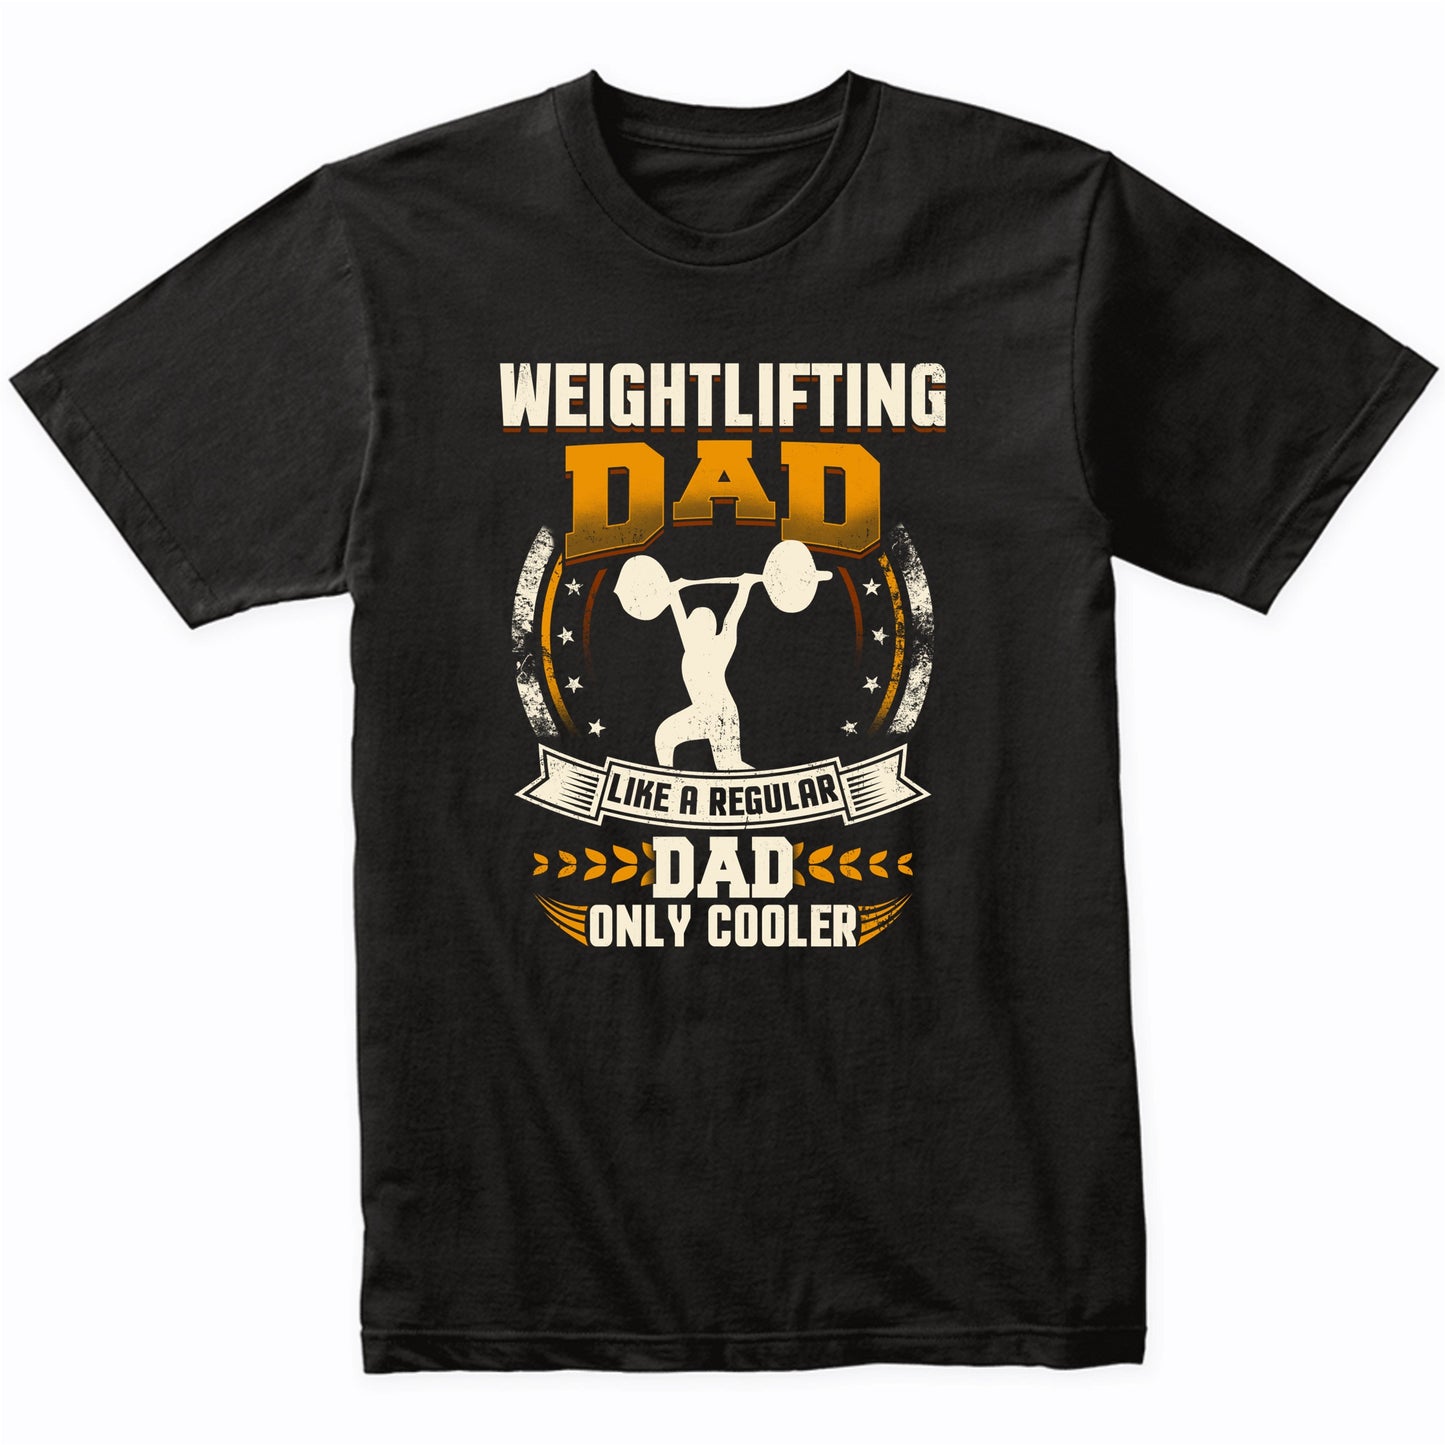 Weightlifting Dad Like A Regular Dad Only Cooler Funny T-Shirt